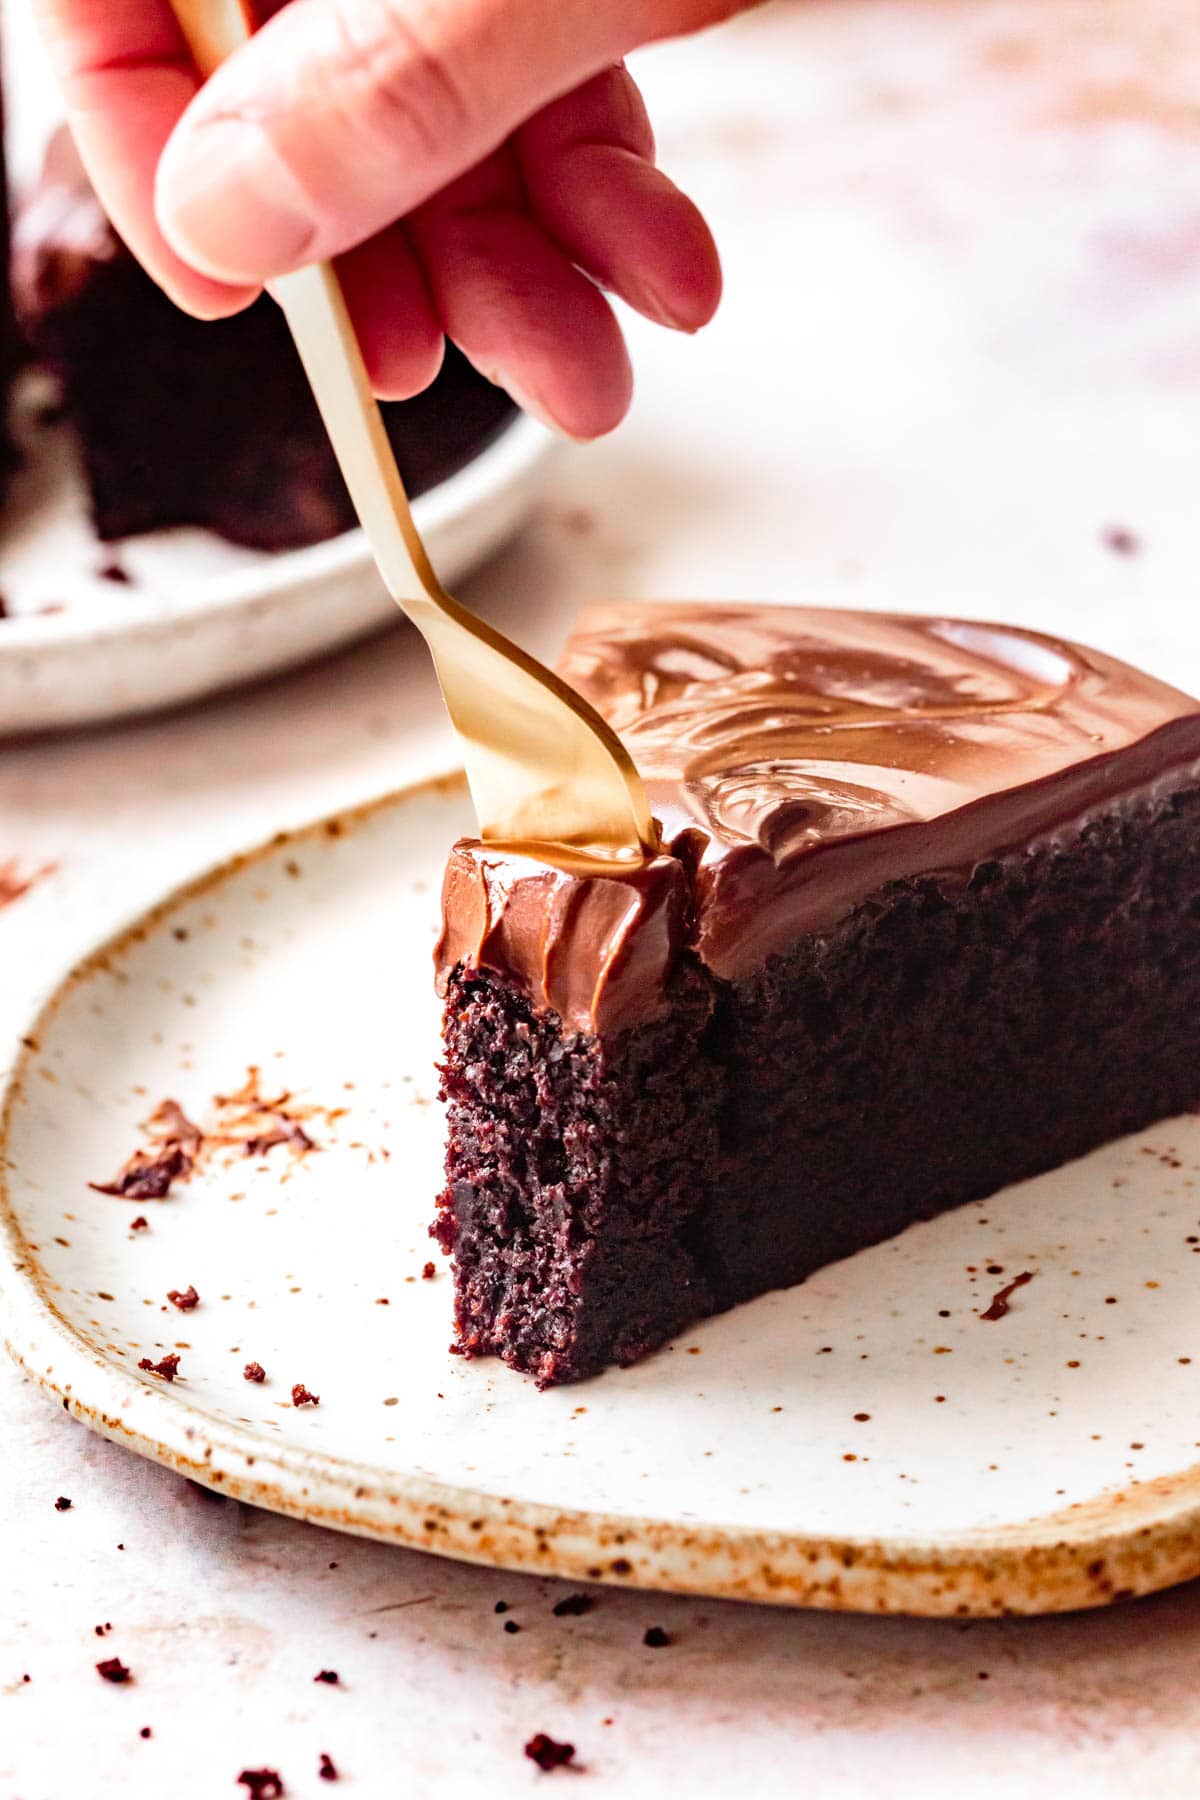 A gold fork dives into a slice of rich, decadent chocolate cake